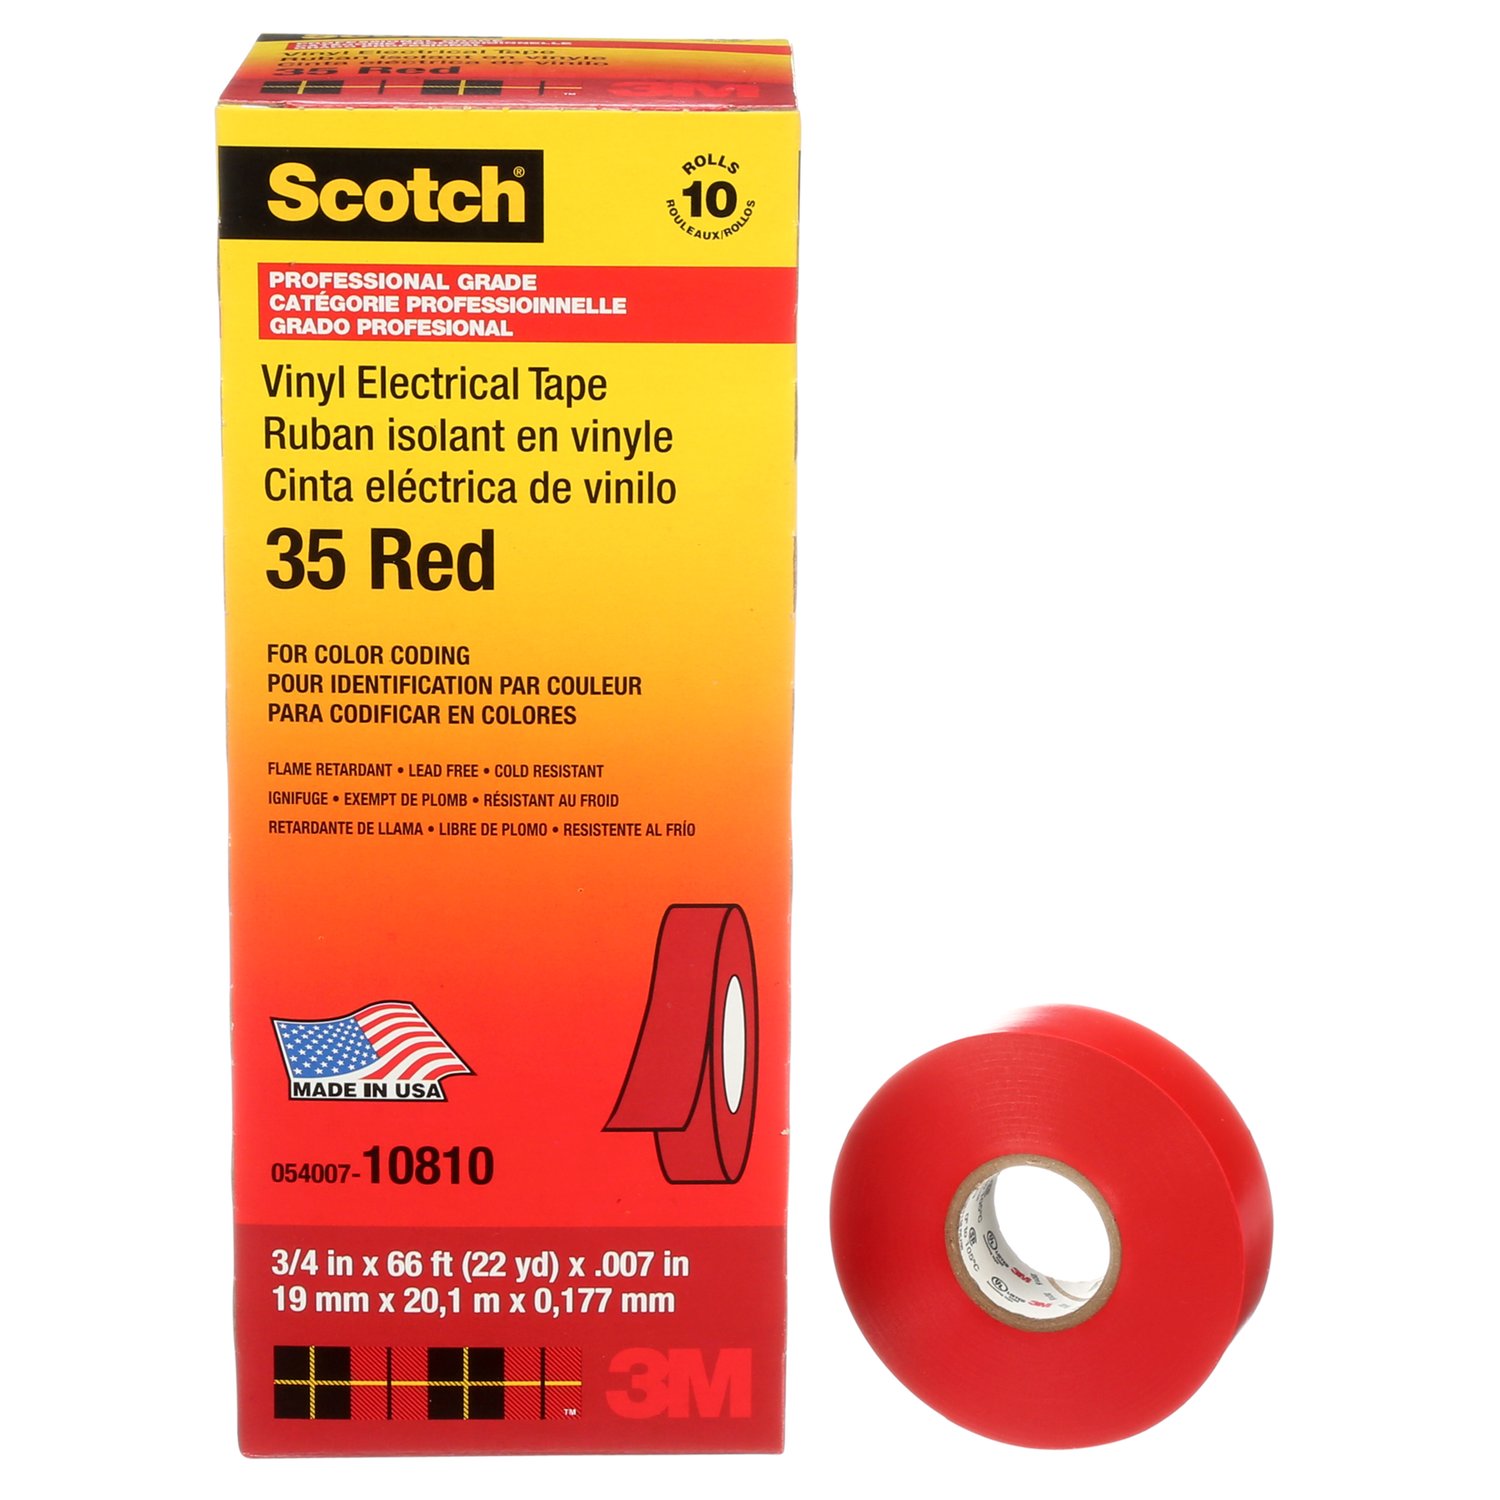 7000006094 - Scotch Vinyl Color Coding Electrical Tape 35, 3/4 in x 66 ft, Red, 10
rolls/carton, 100 rolls/Case